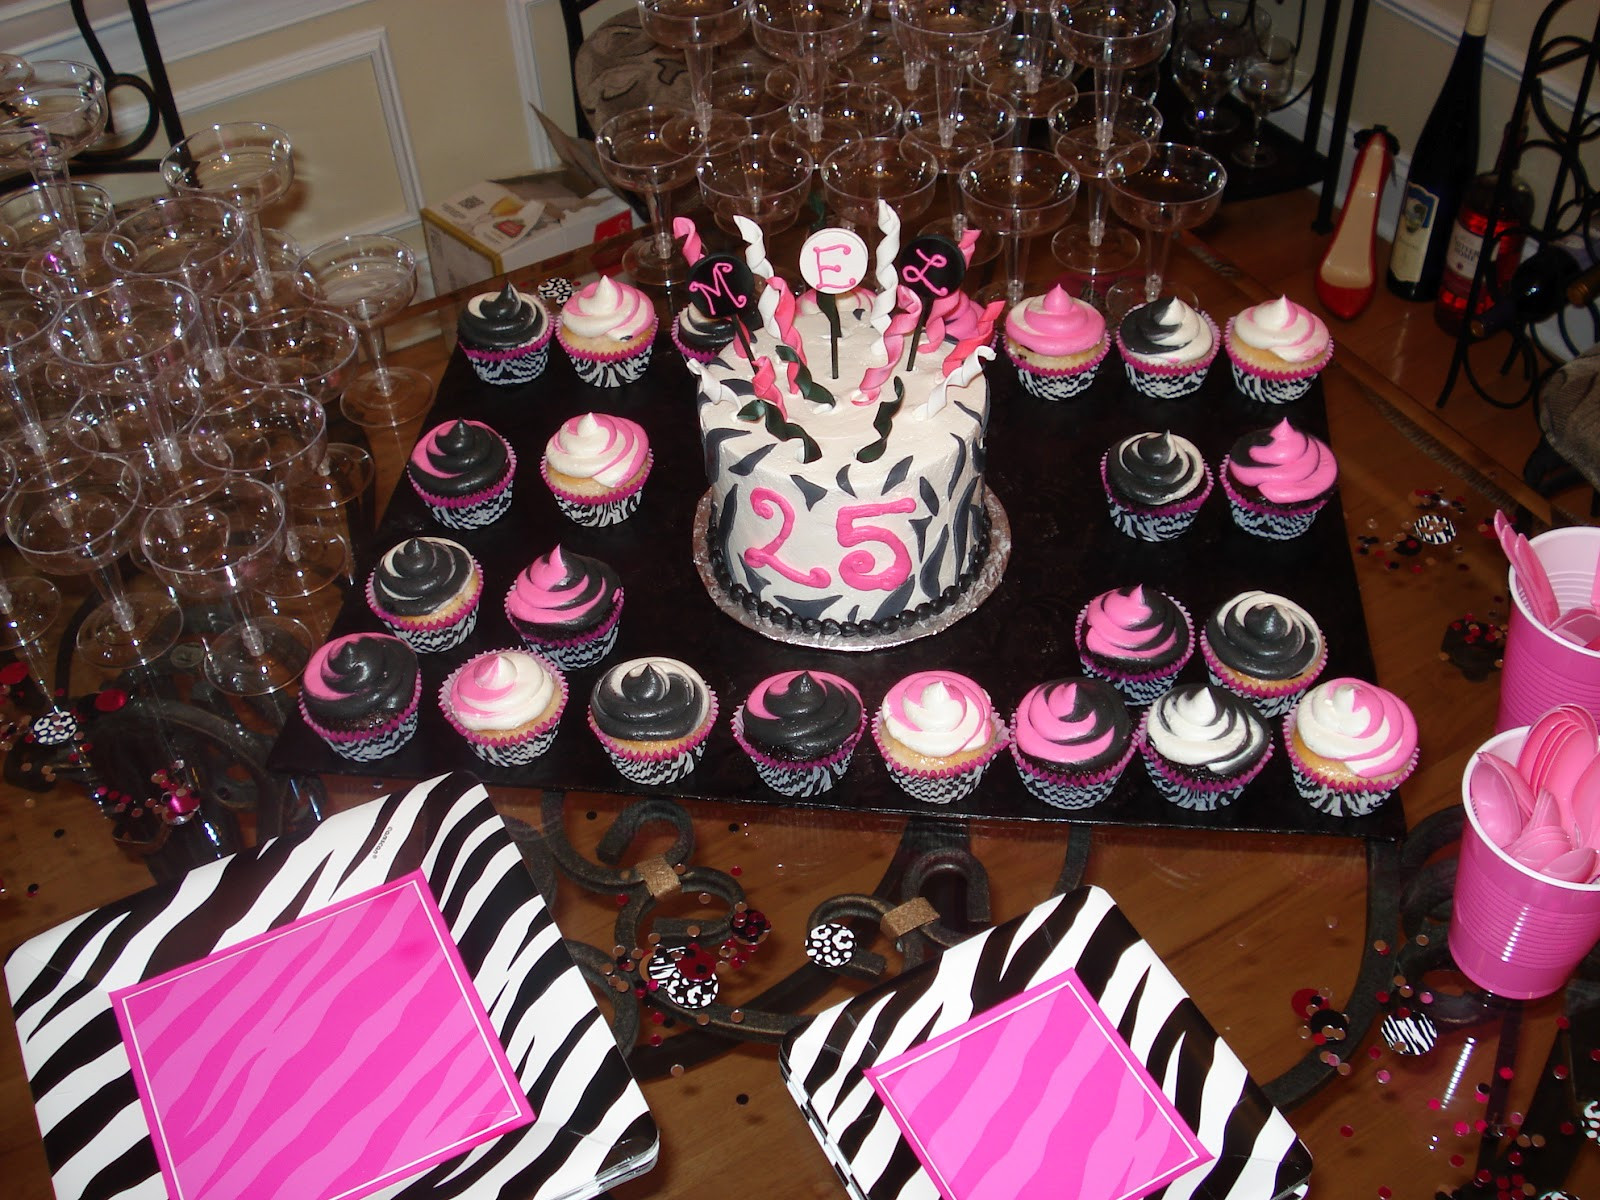 Best ideas about 25th Birthday Gifts For Her
. Save or Pin Mel s Surprise 25th Birthday Party Carolina Charm Now.